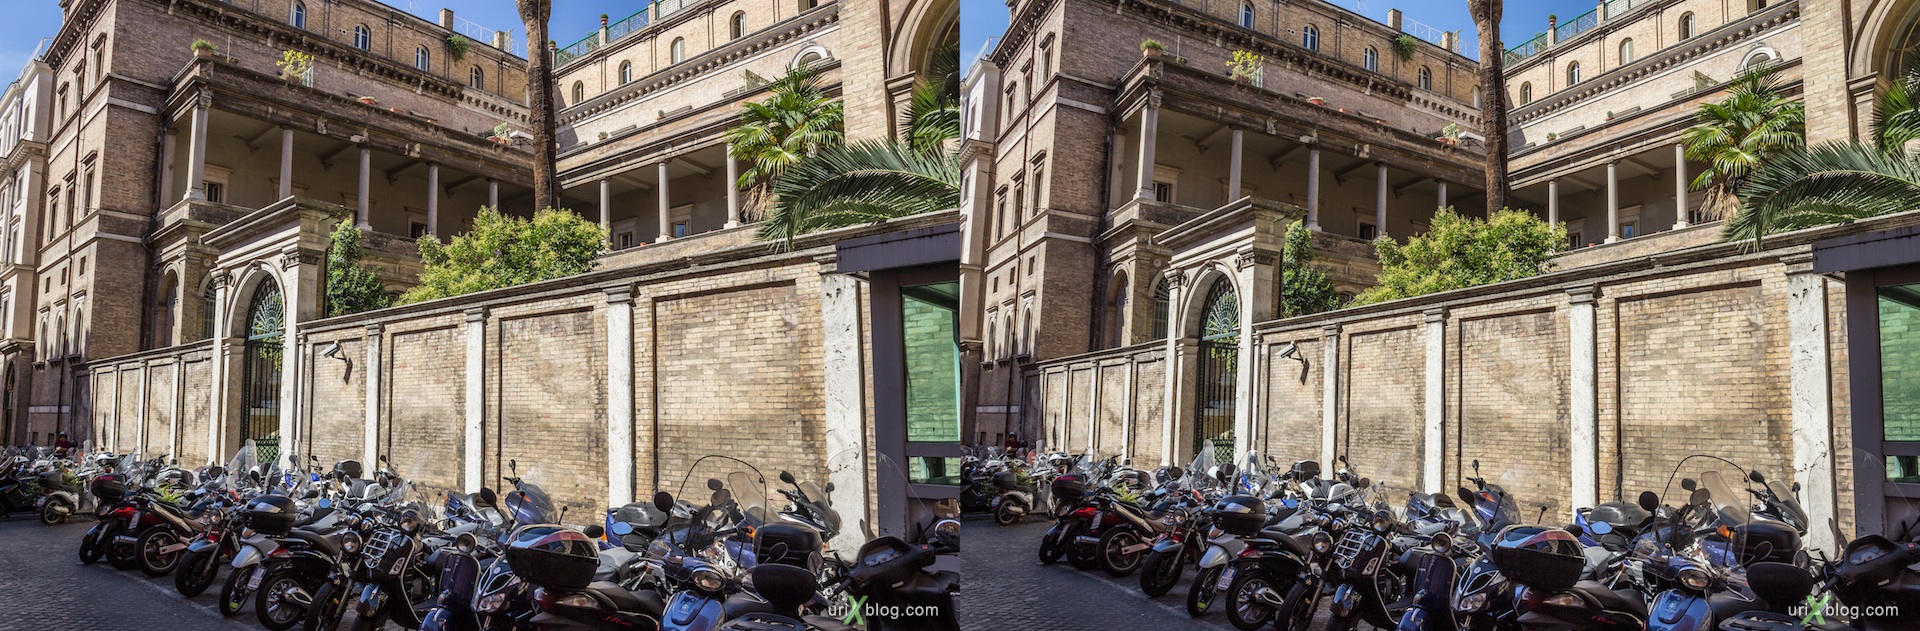 2012, wall, fence, Via di San Vitale street, Rome, Italy, Europe, 3D, stereo pair, cross-eyed, crossview, cross view stereo pair